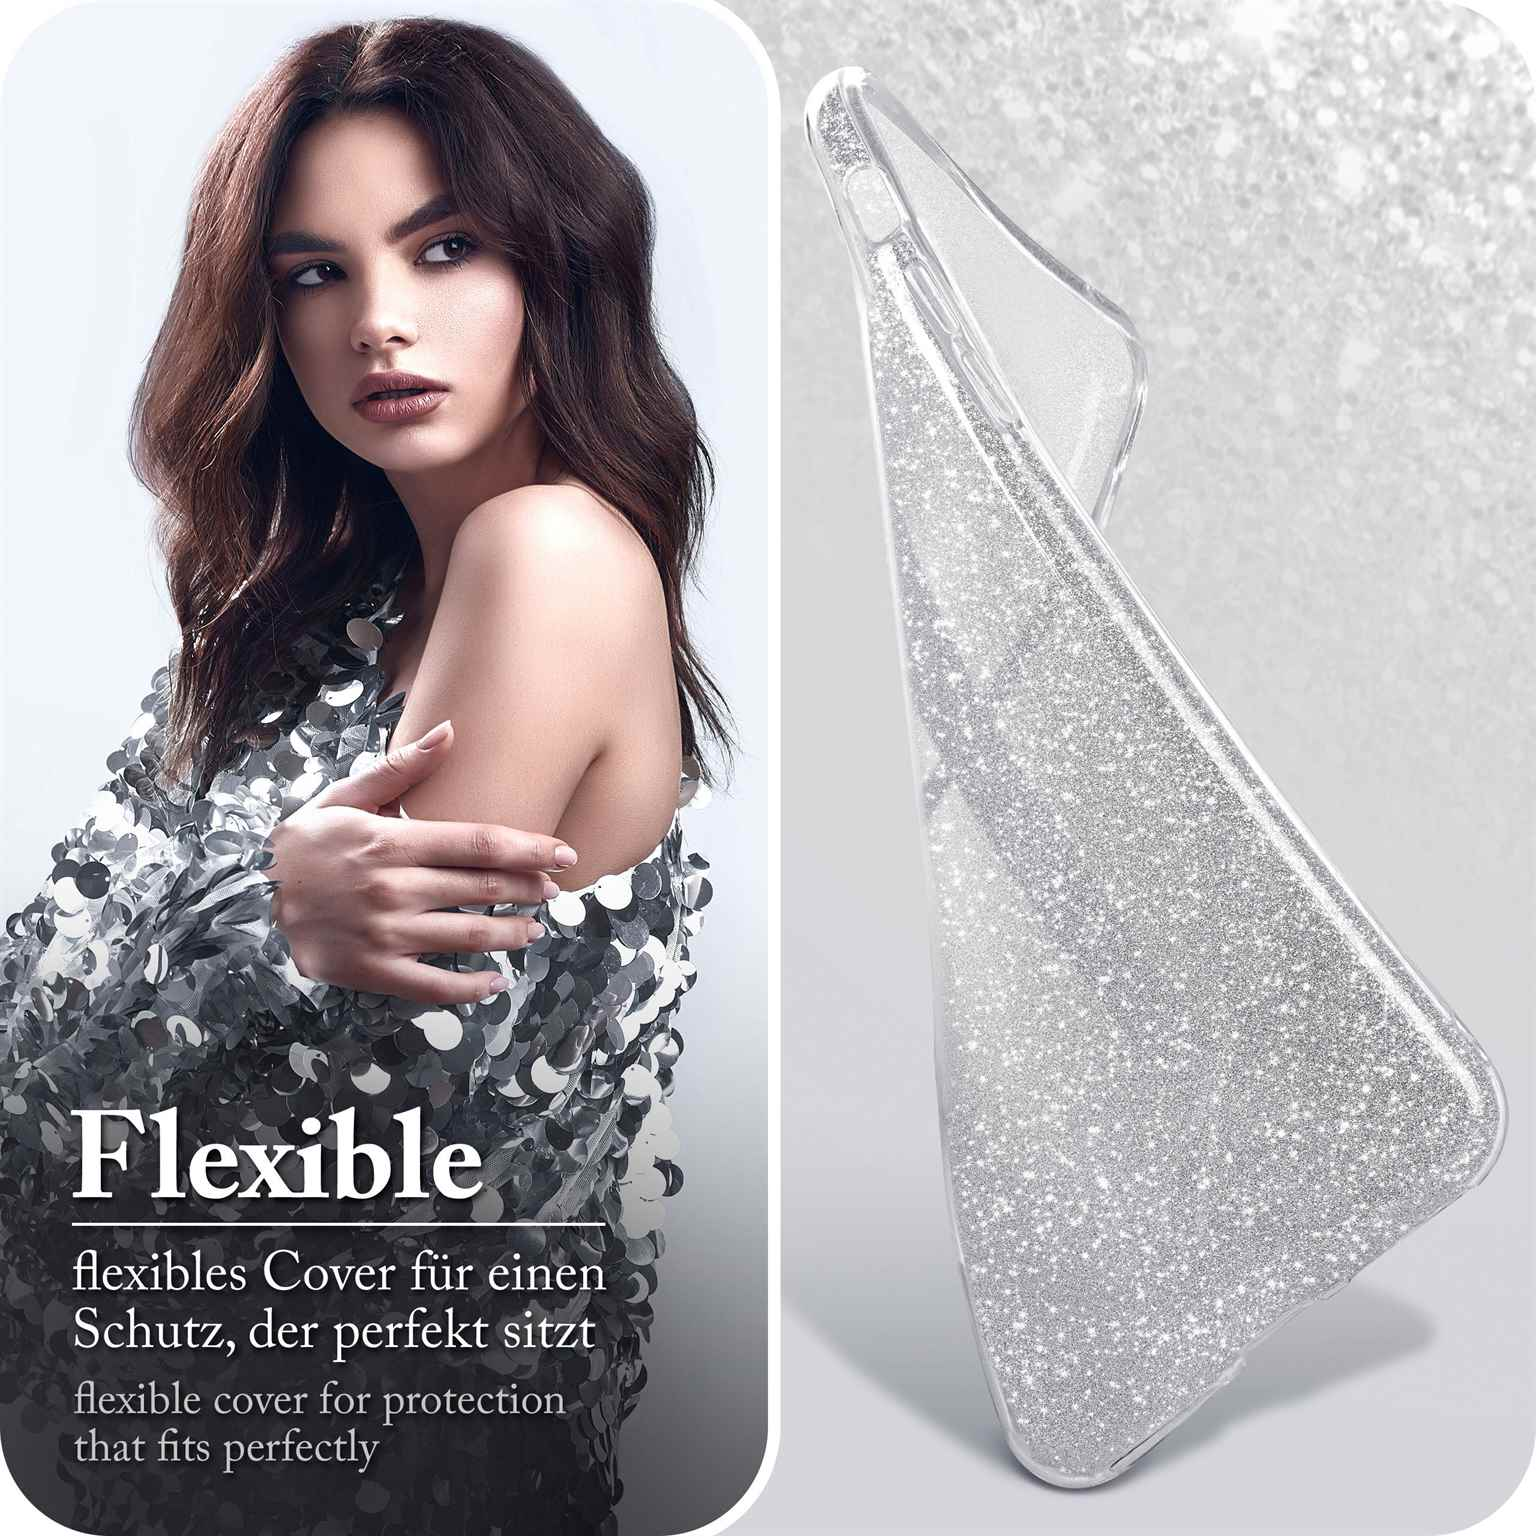 Samsung, Backcover, Silver Case, Sparkle (2018), Galaxy Glitter ONEFLOW A7 -